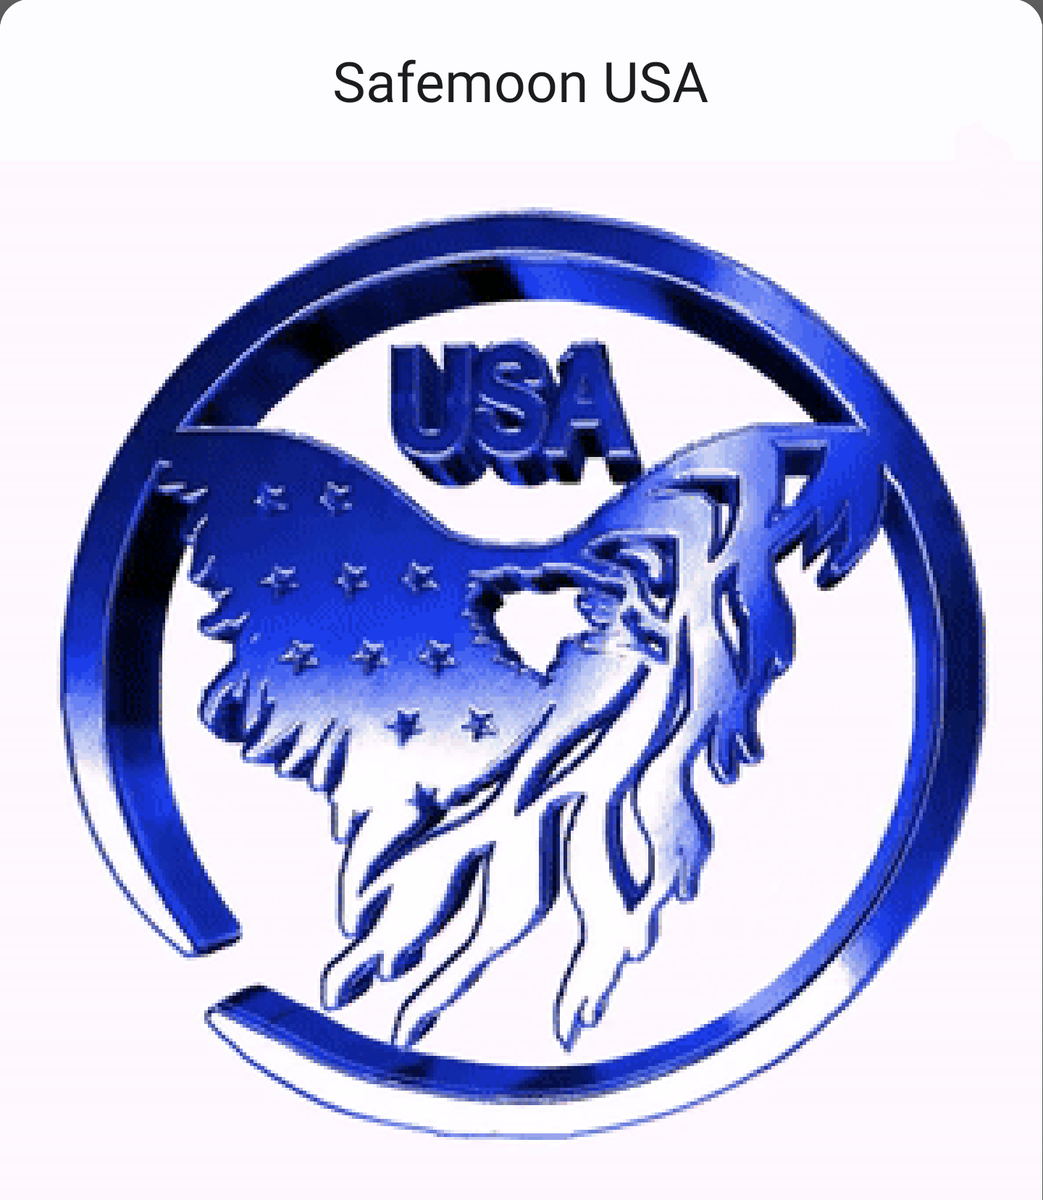 Who is in need of the new SafeMoon USA NFT? Only enter if you do not have one yet.  

Must follow:
@rla323 @SafemoonYolo and @RipVanWizard

Like and retweet this post and comment below your favorite GIF that makes you think of the USA!  

3 winners picked tomorrow noon EST.